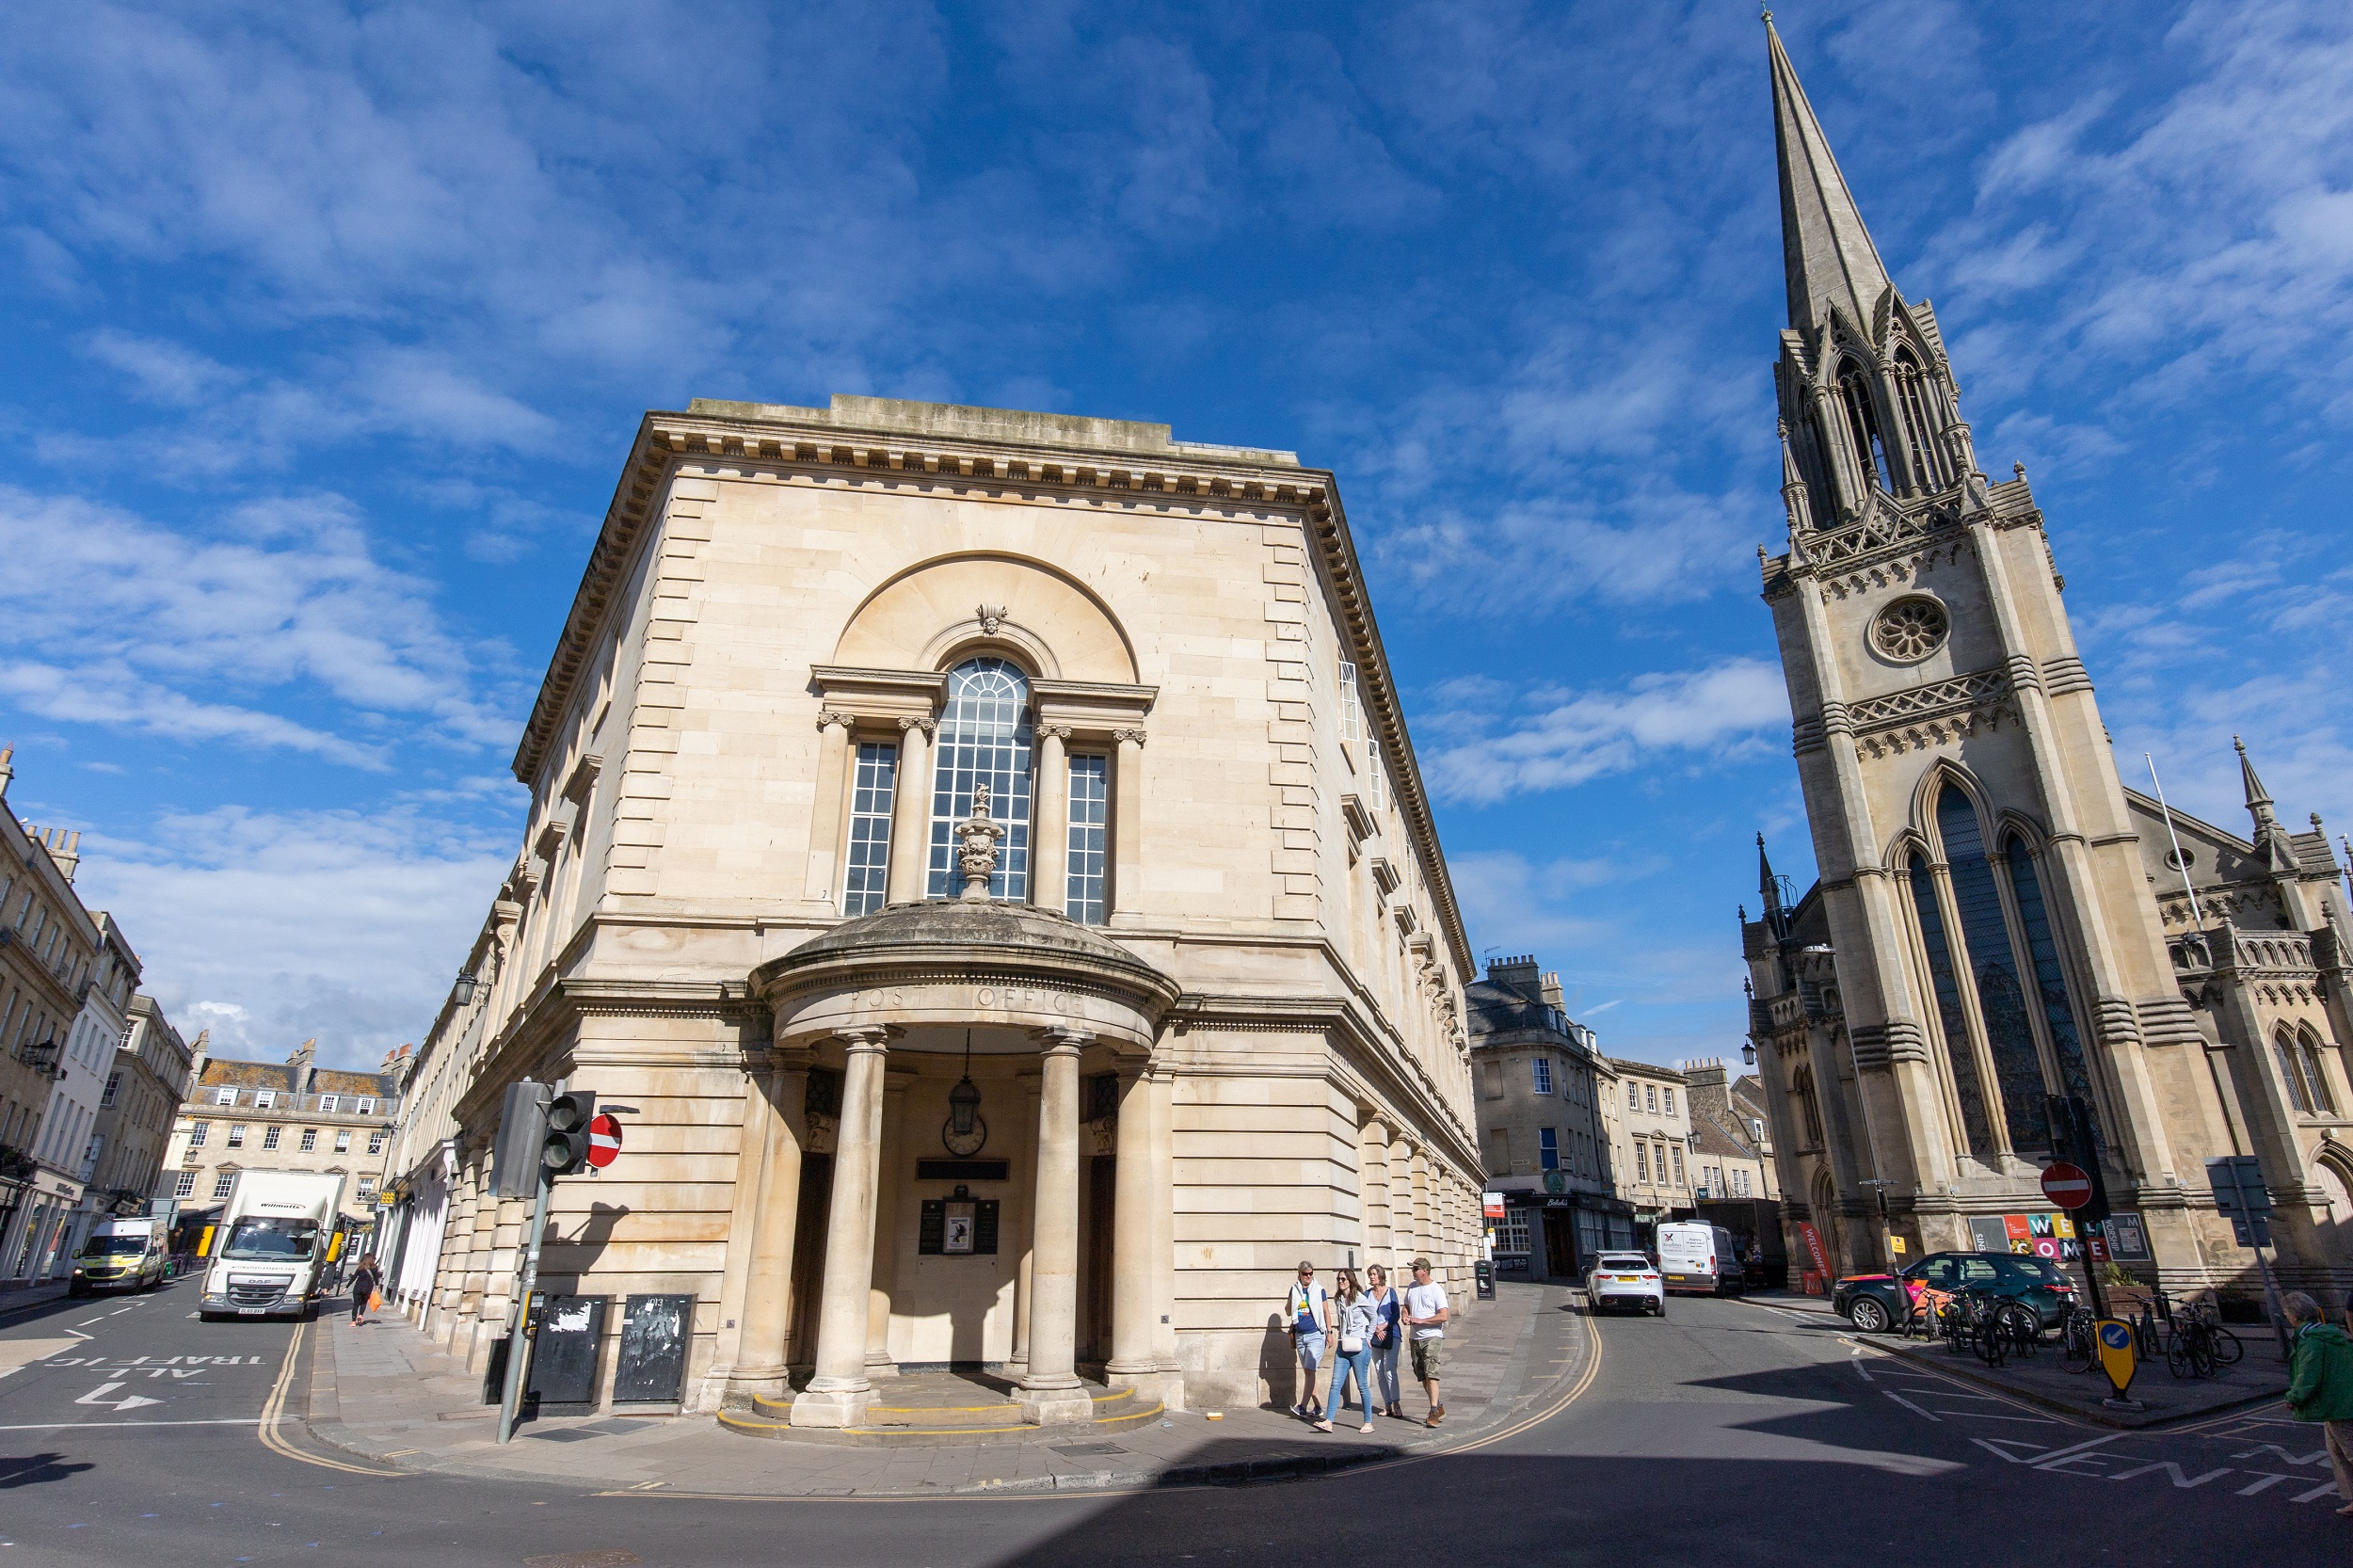 The Old Post Office building in Bath with St Michael's Church to the right, on a sunny day against a background of blue sky